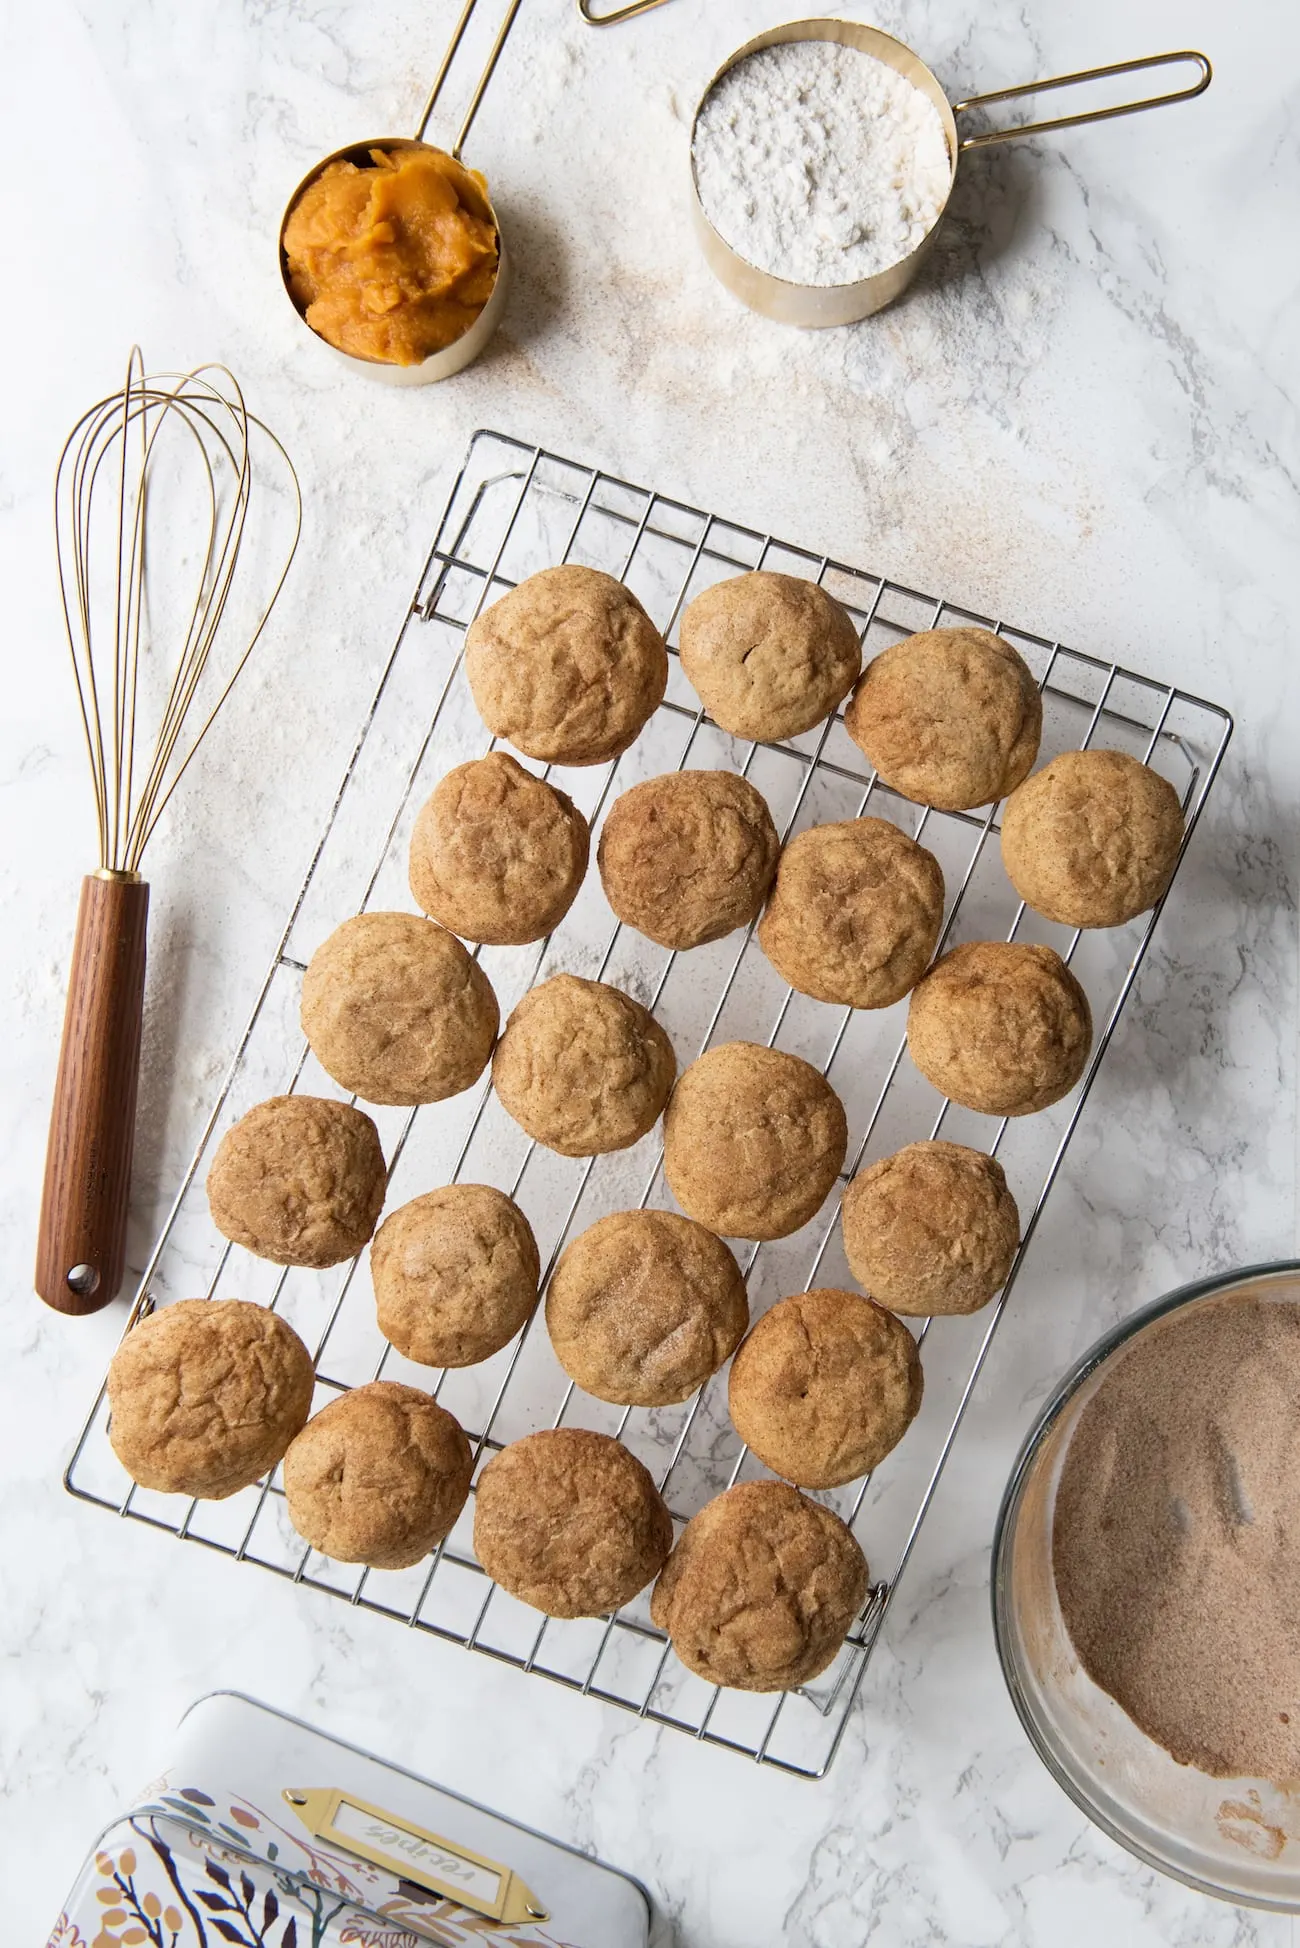 Pumpkin Snickerdoodles Recipe | Fall cookie recipes, pumpkin recipes and more from entertaining blog @cydconverse